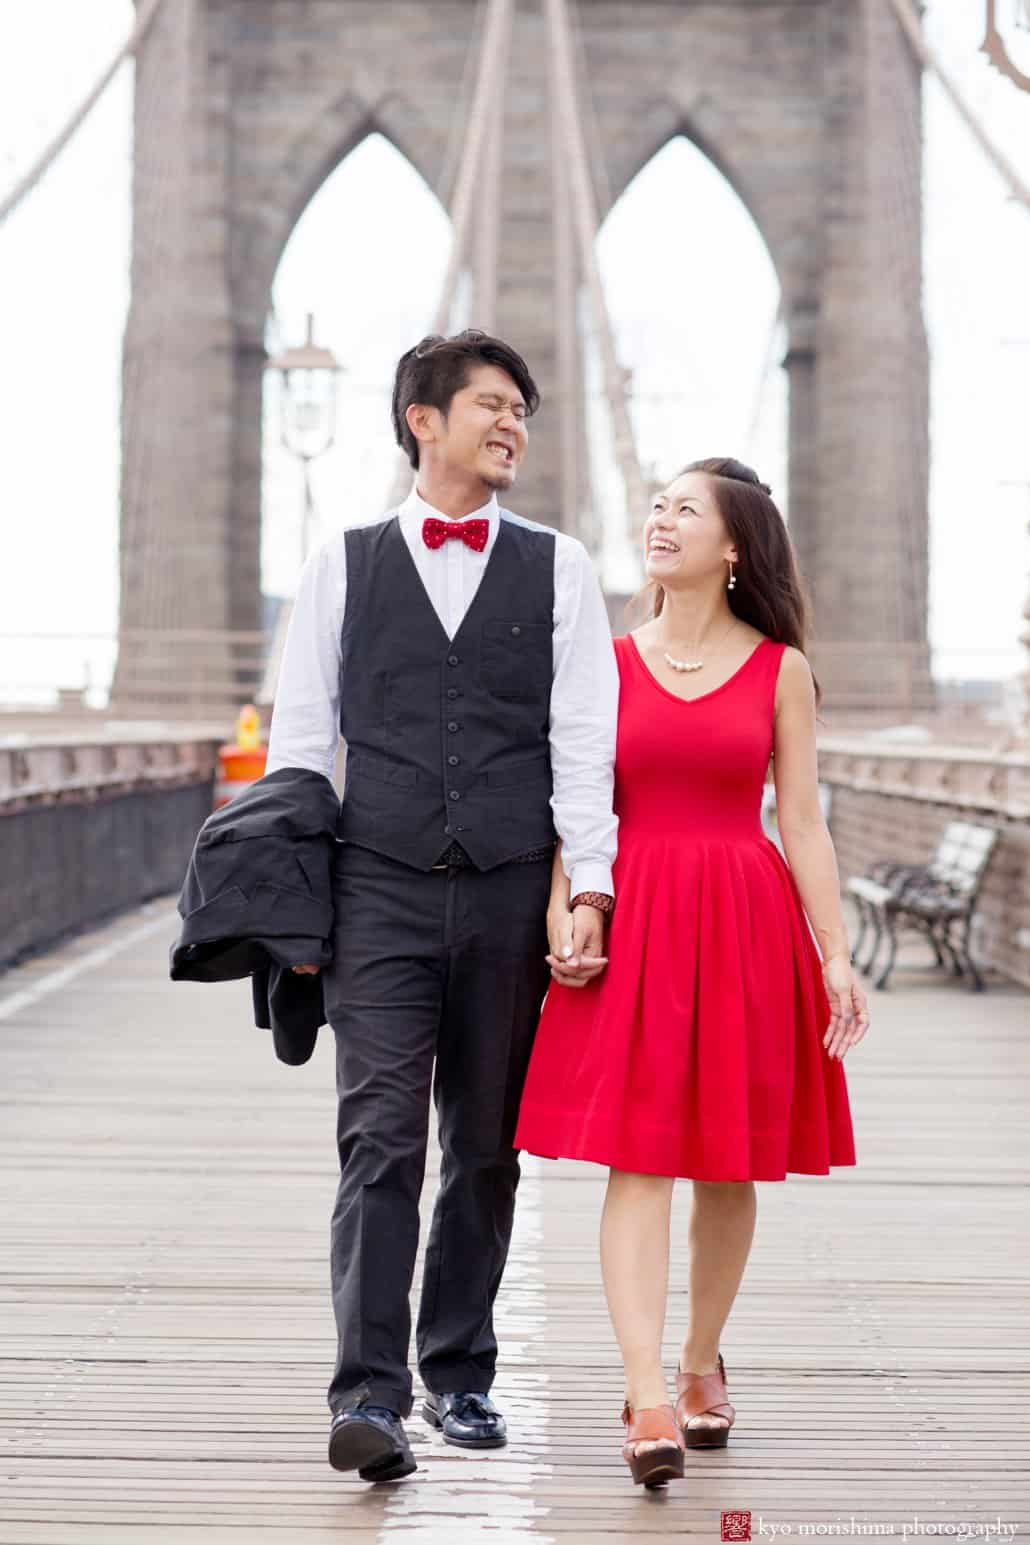 Brooklyn Bridge engagement photo with Japanese couple (woman wearing red dress, man wearing red bow tie), photographed by Kyo Morishima